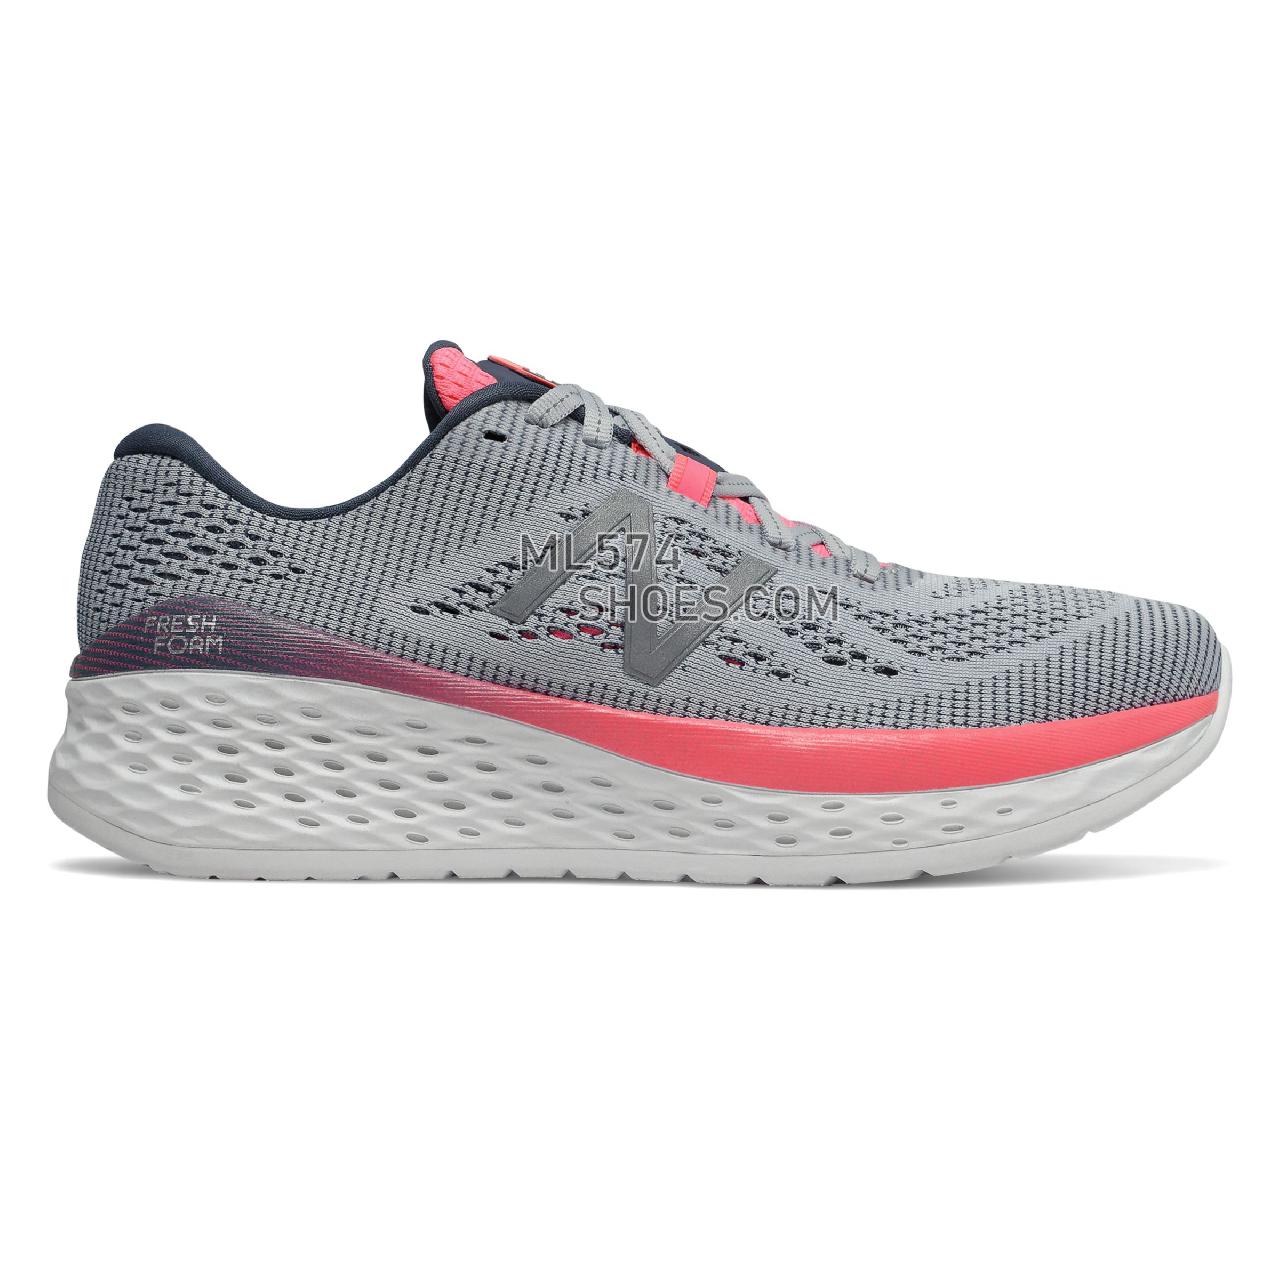 New Balance Fresh Foam More - Women's Neutral Running - Light Cyclone with Guava and Reflection - WMORGC